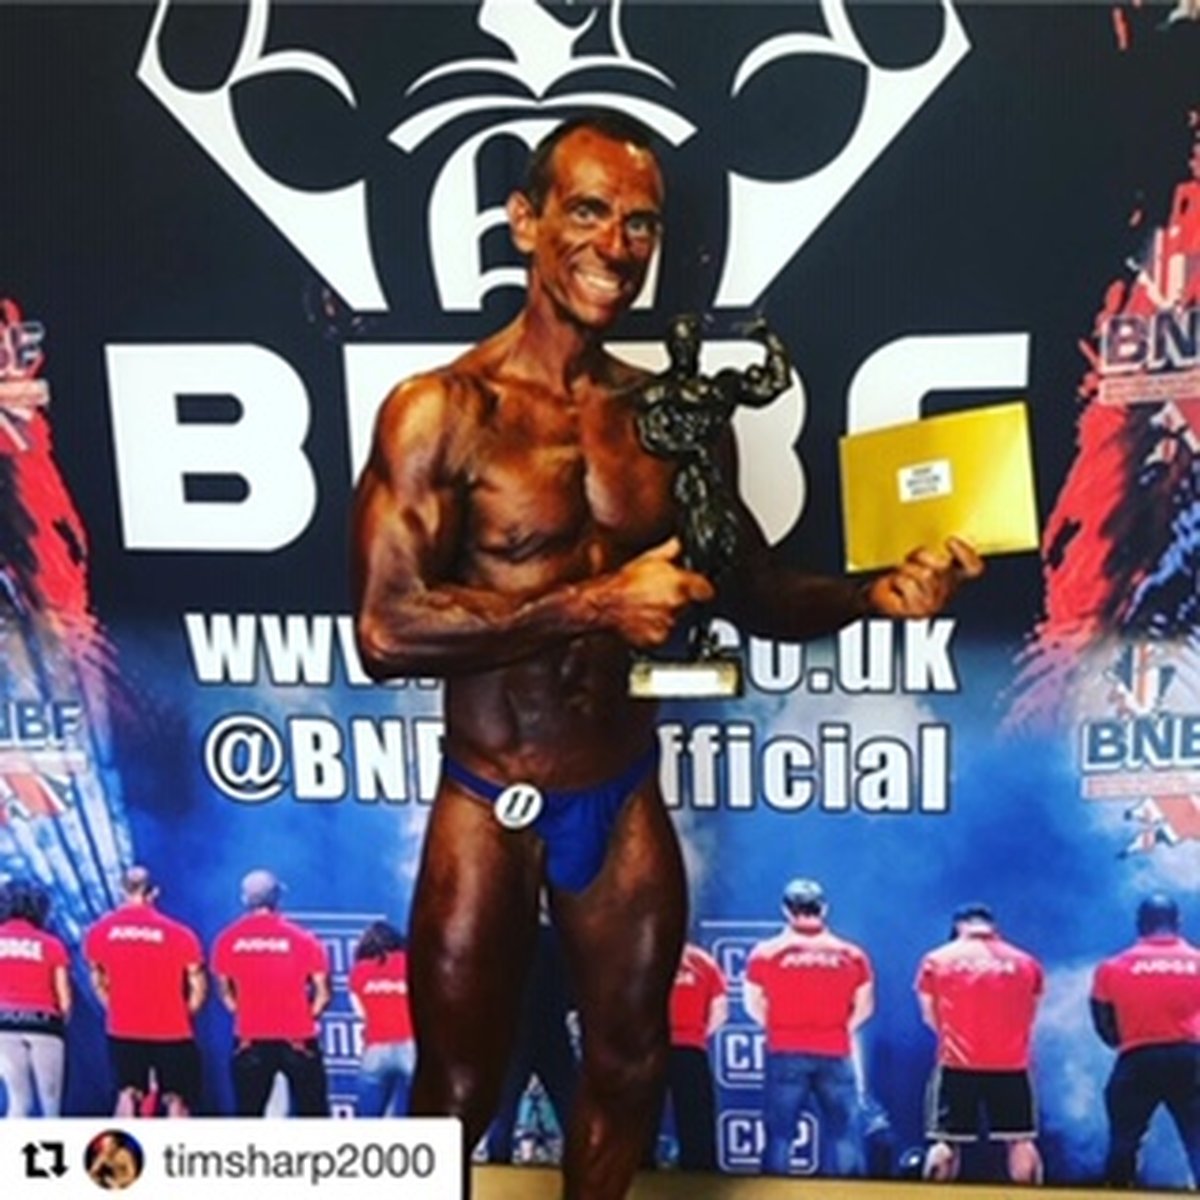 Image of Background Images from the 2019 BNBF Welsh